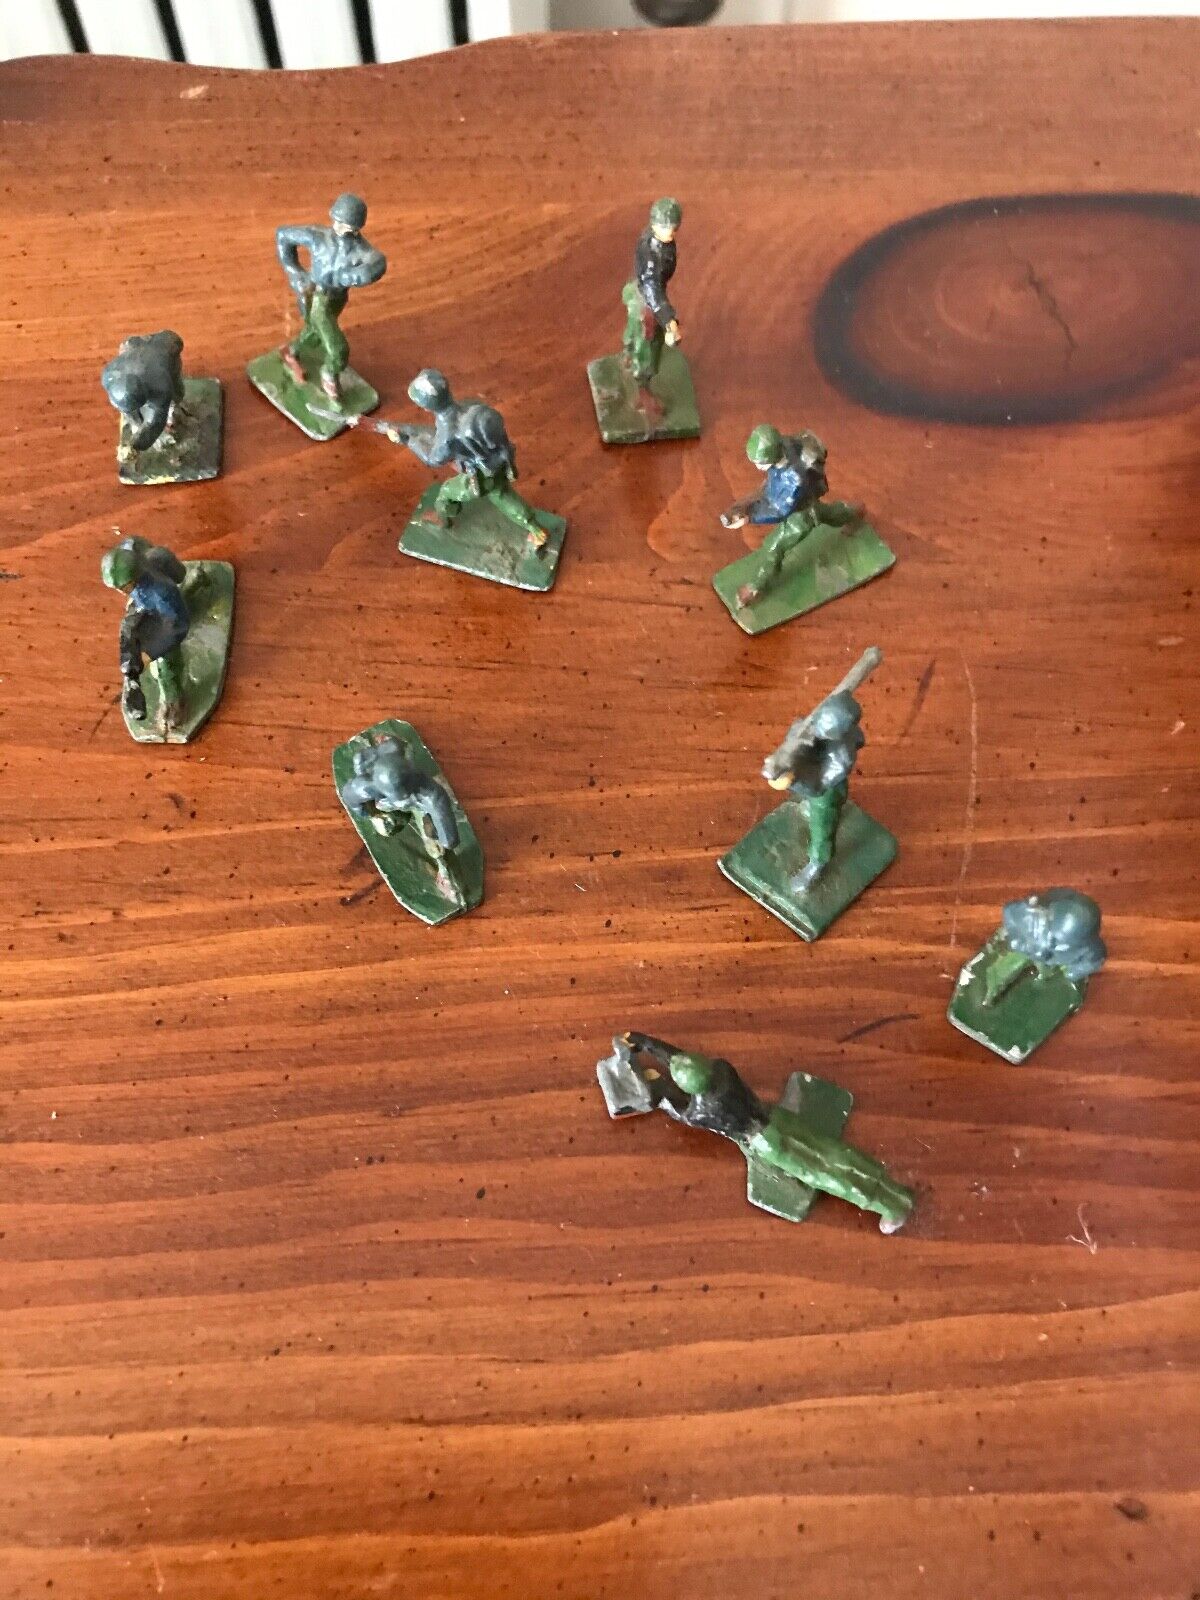 Vtg Lot 10 Union OF S Africa Miniature Metal Lead Toy Soldier Military FIGURES